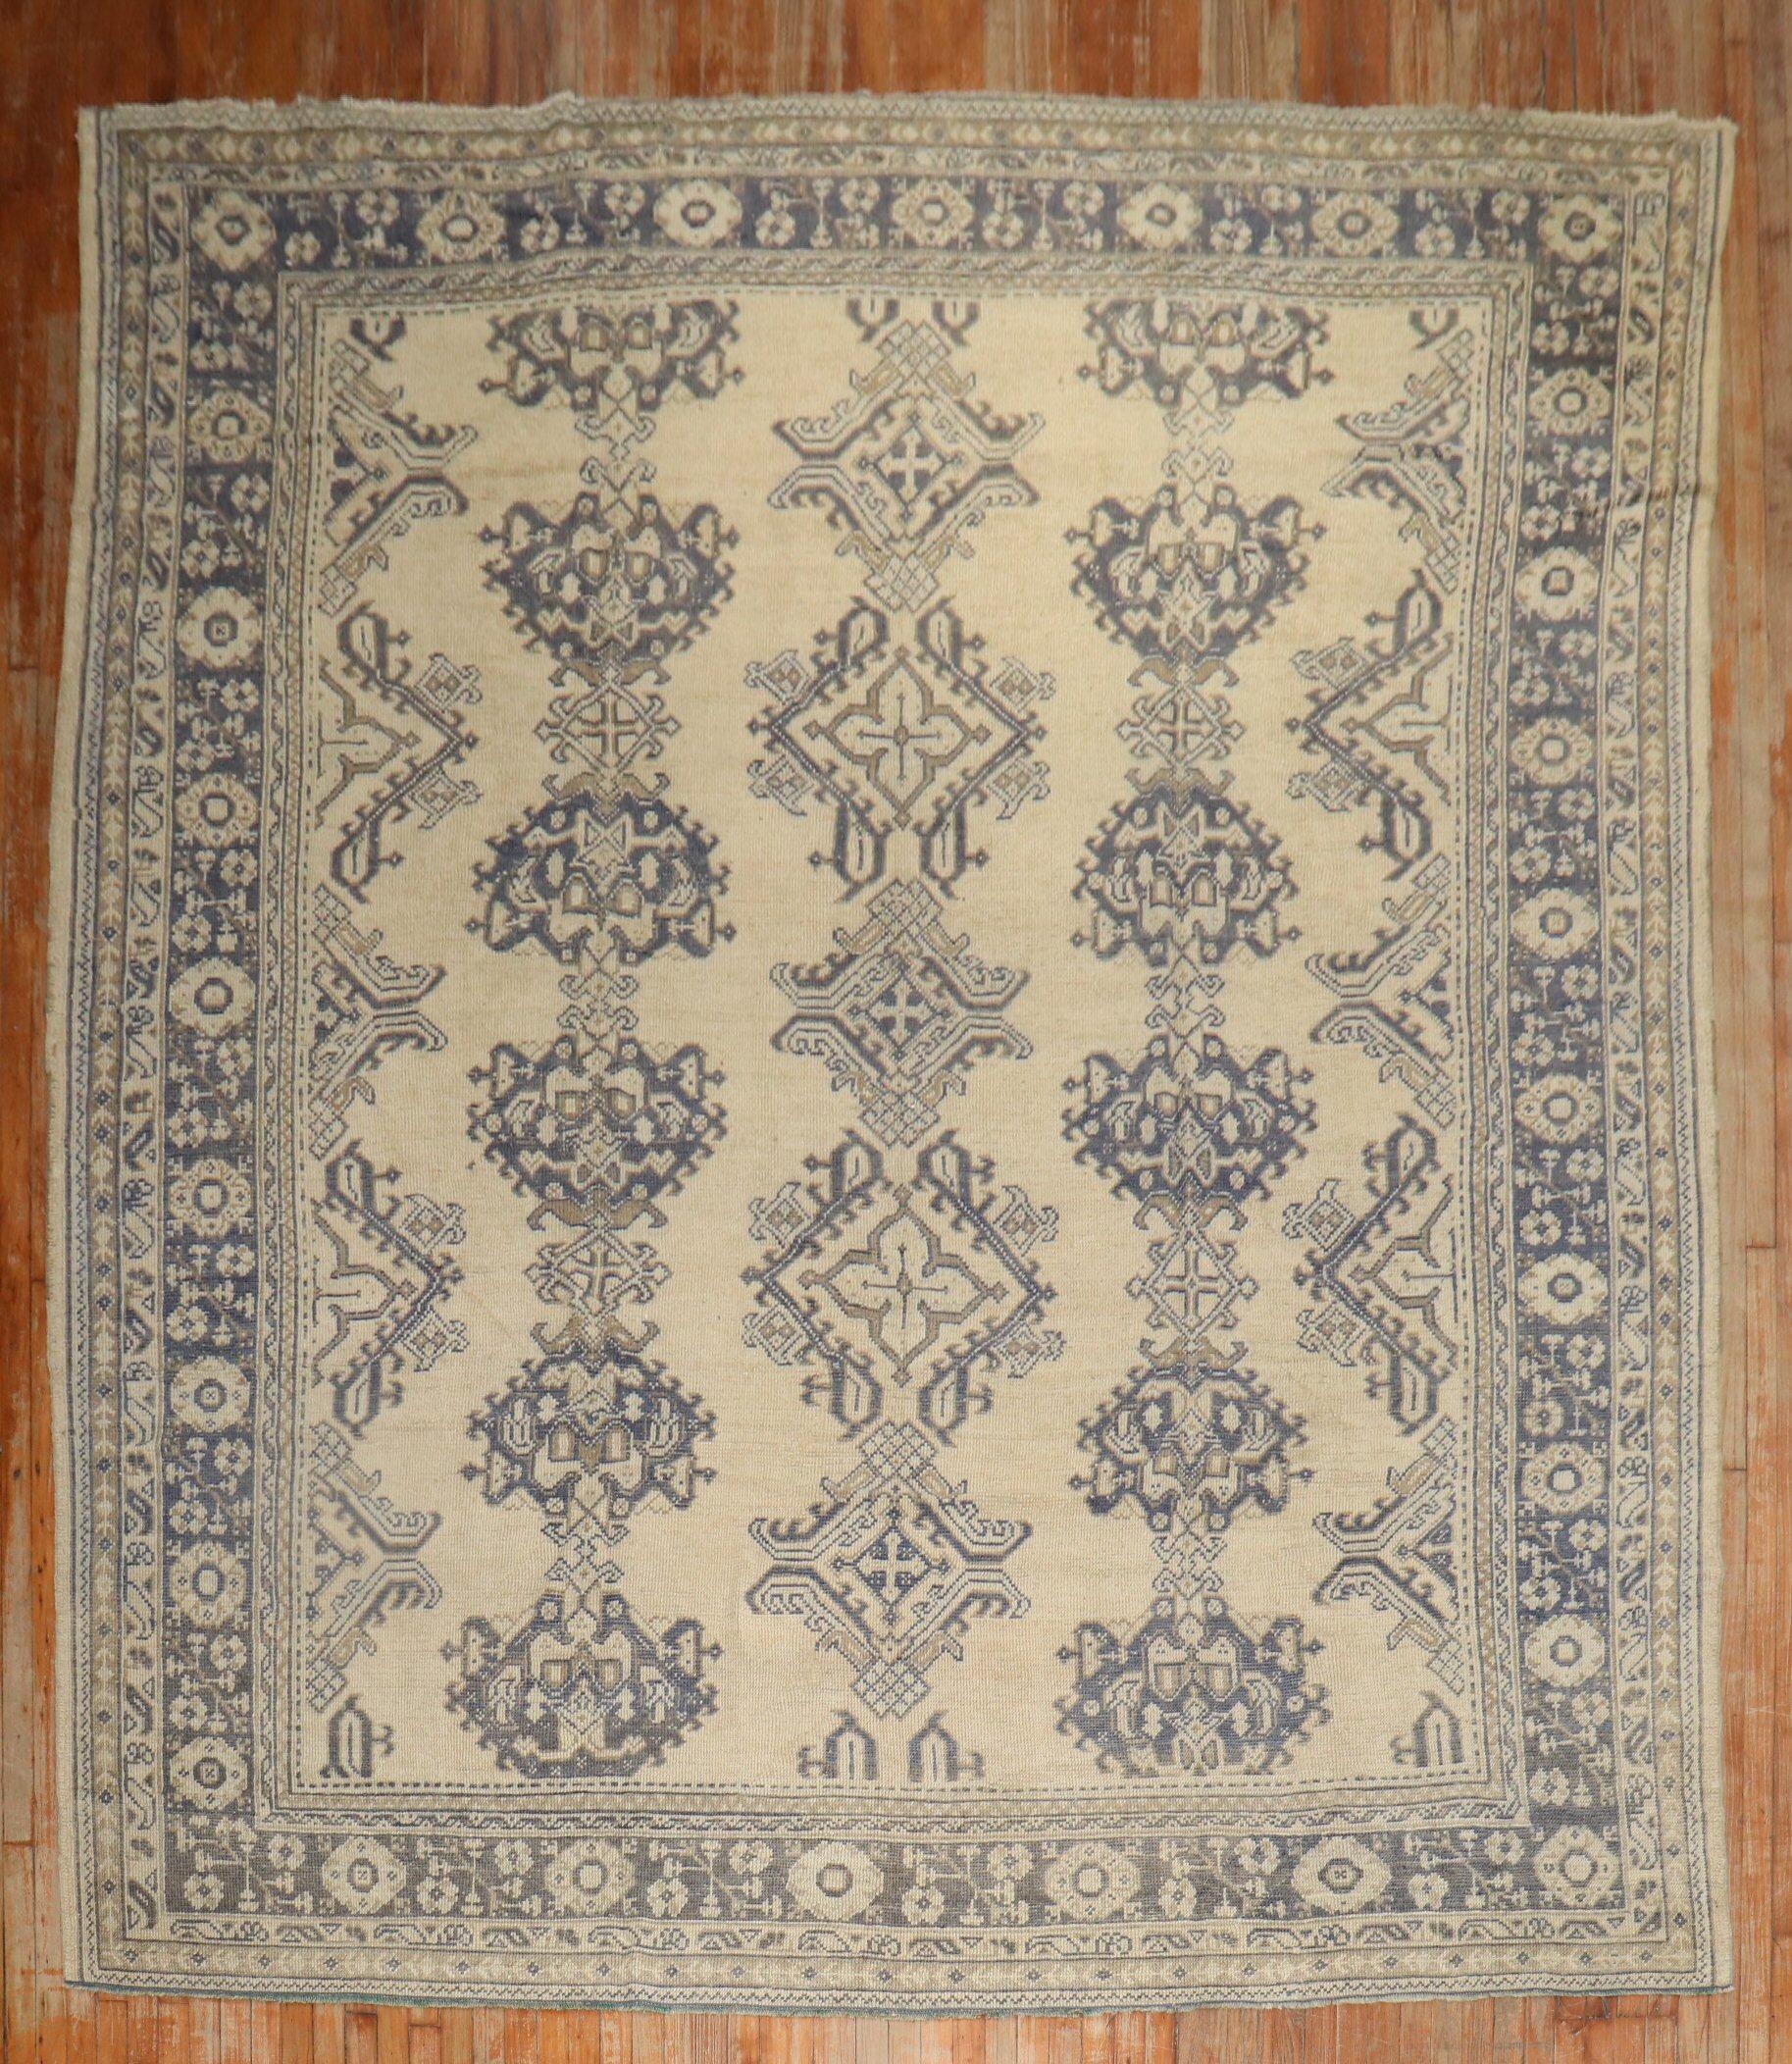 An early 20th-century square room-size Turkish Oushak rug with a bluecrab motif on a neutral color field

Measures: 10'1'' x 12'5